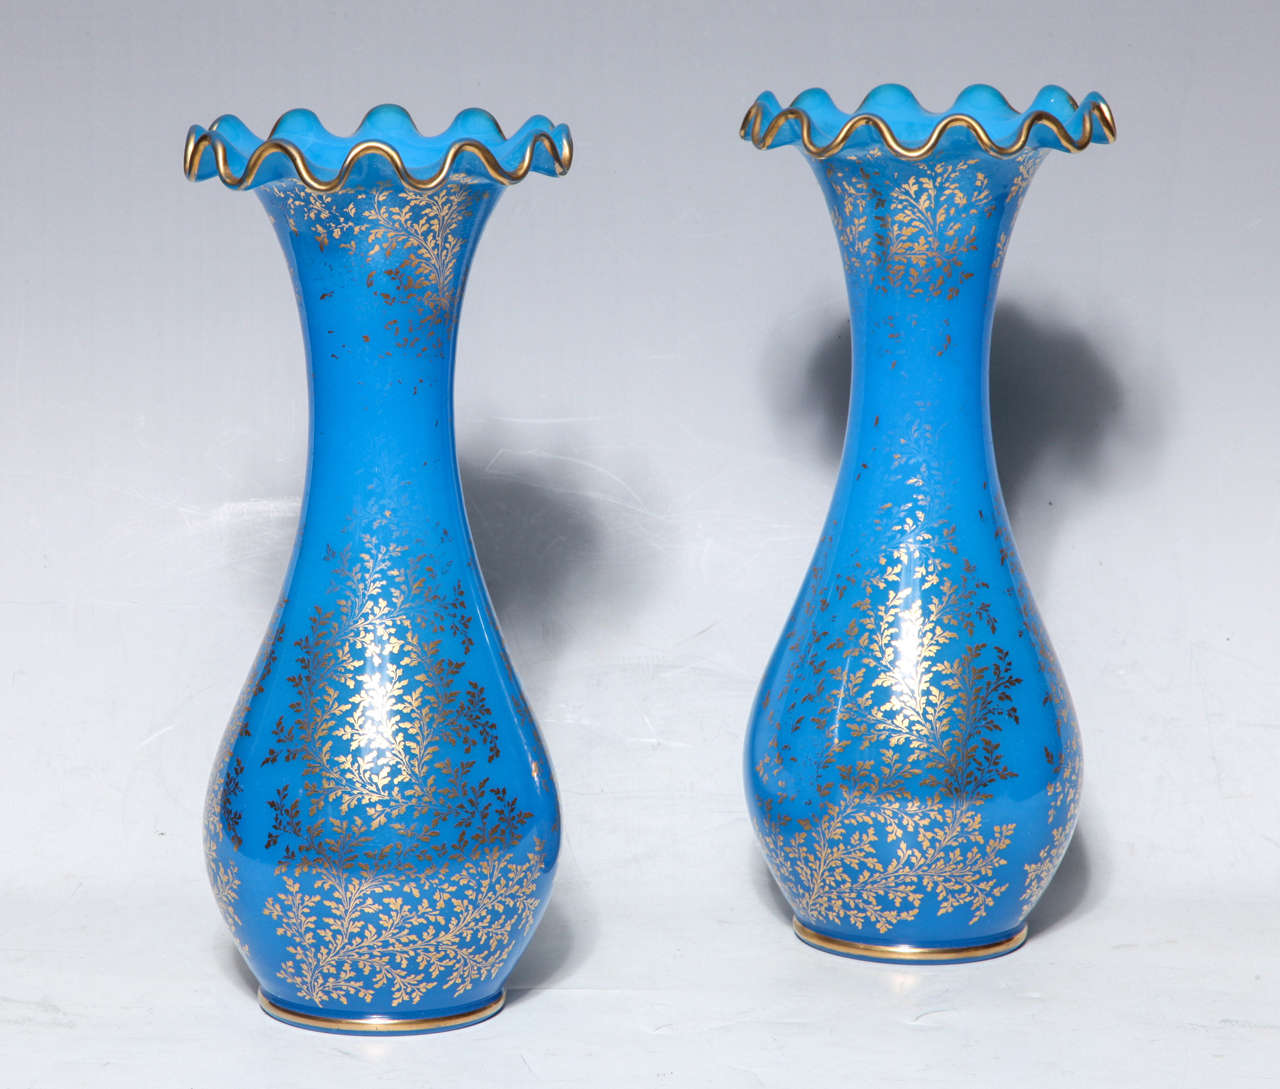 Pair of Baccarat blue opaline crystal vases with 24-karat hand-painted gold floral decorations and rippled rims. For a similar pair please pictures in the Baccarat book. Pair of Baccarat blue opaline crystal vases with 24-karat hand-painted gold